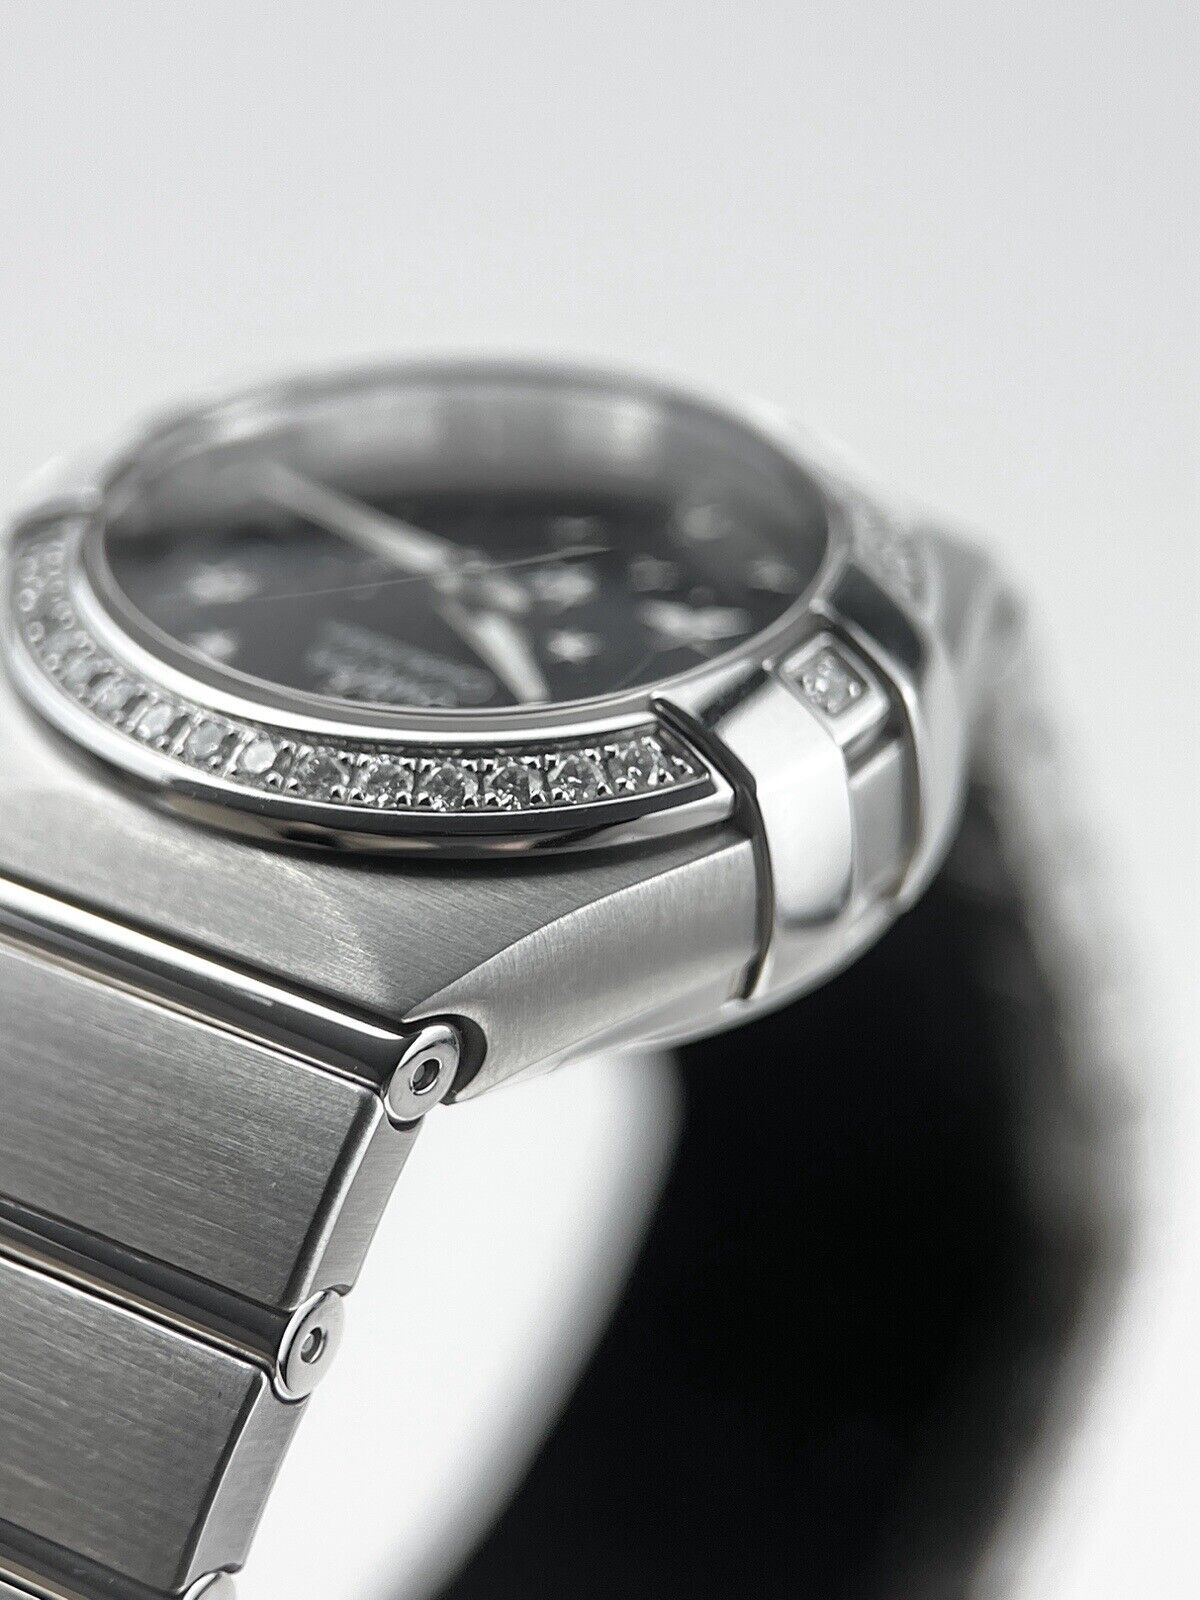 OMEGA Constellation 123.15.27.20.01.001 Dial Lady's Watch - Factory Diamonds